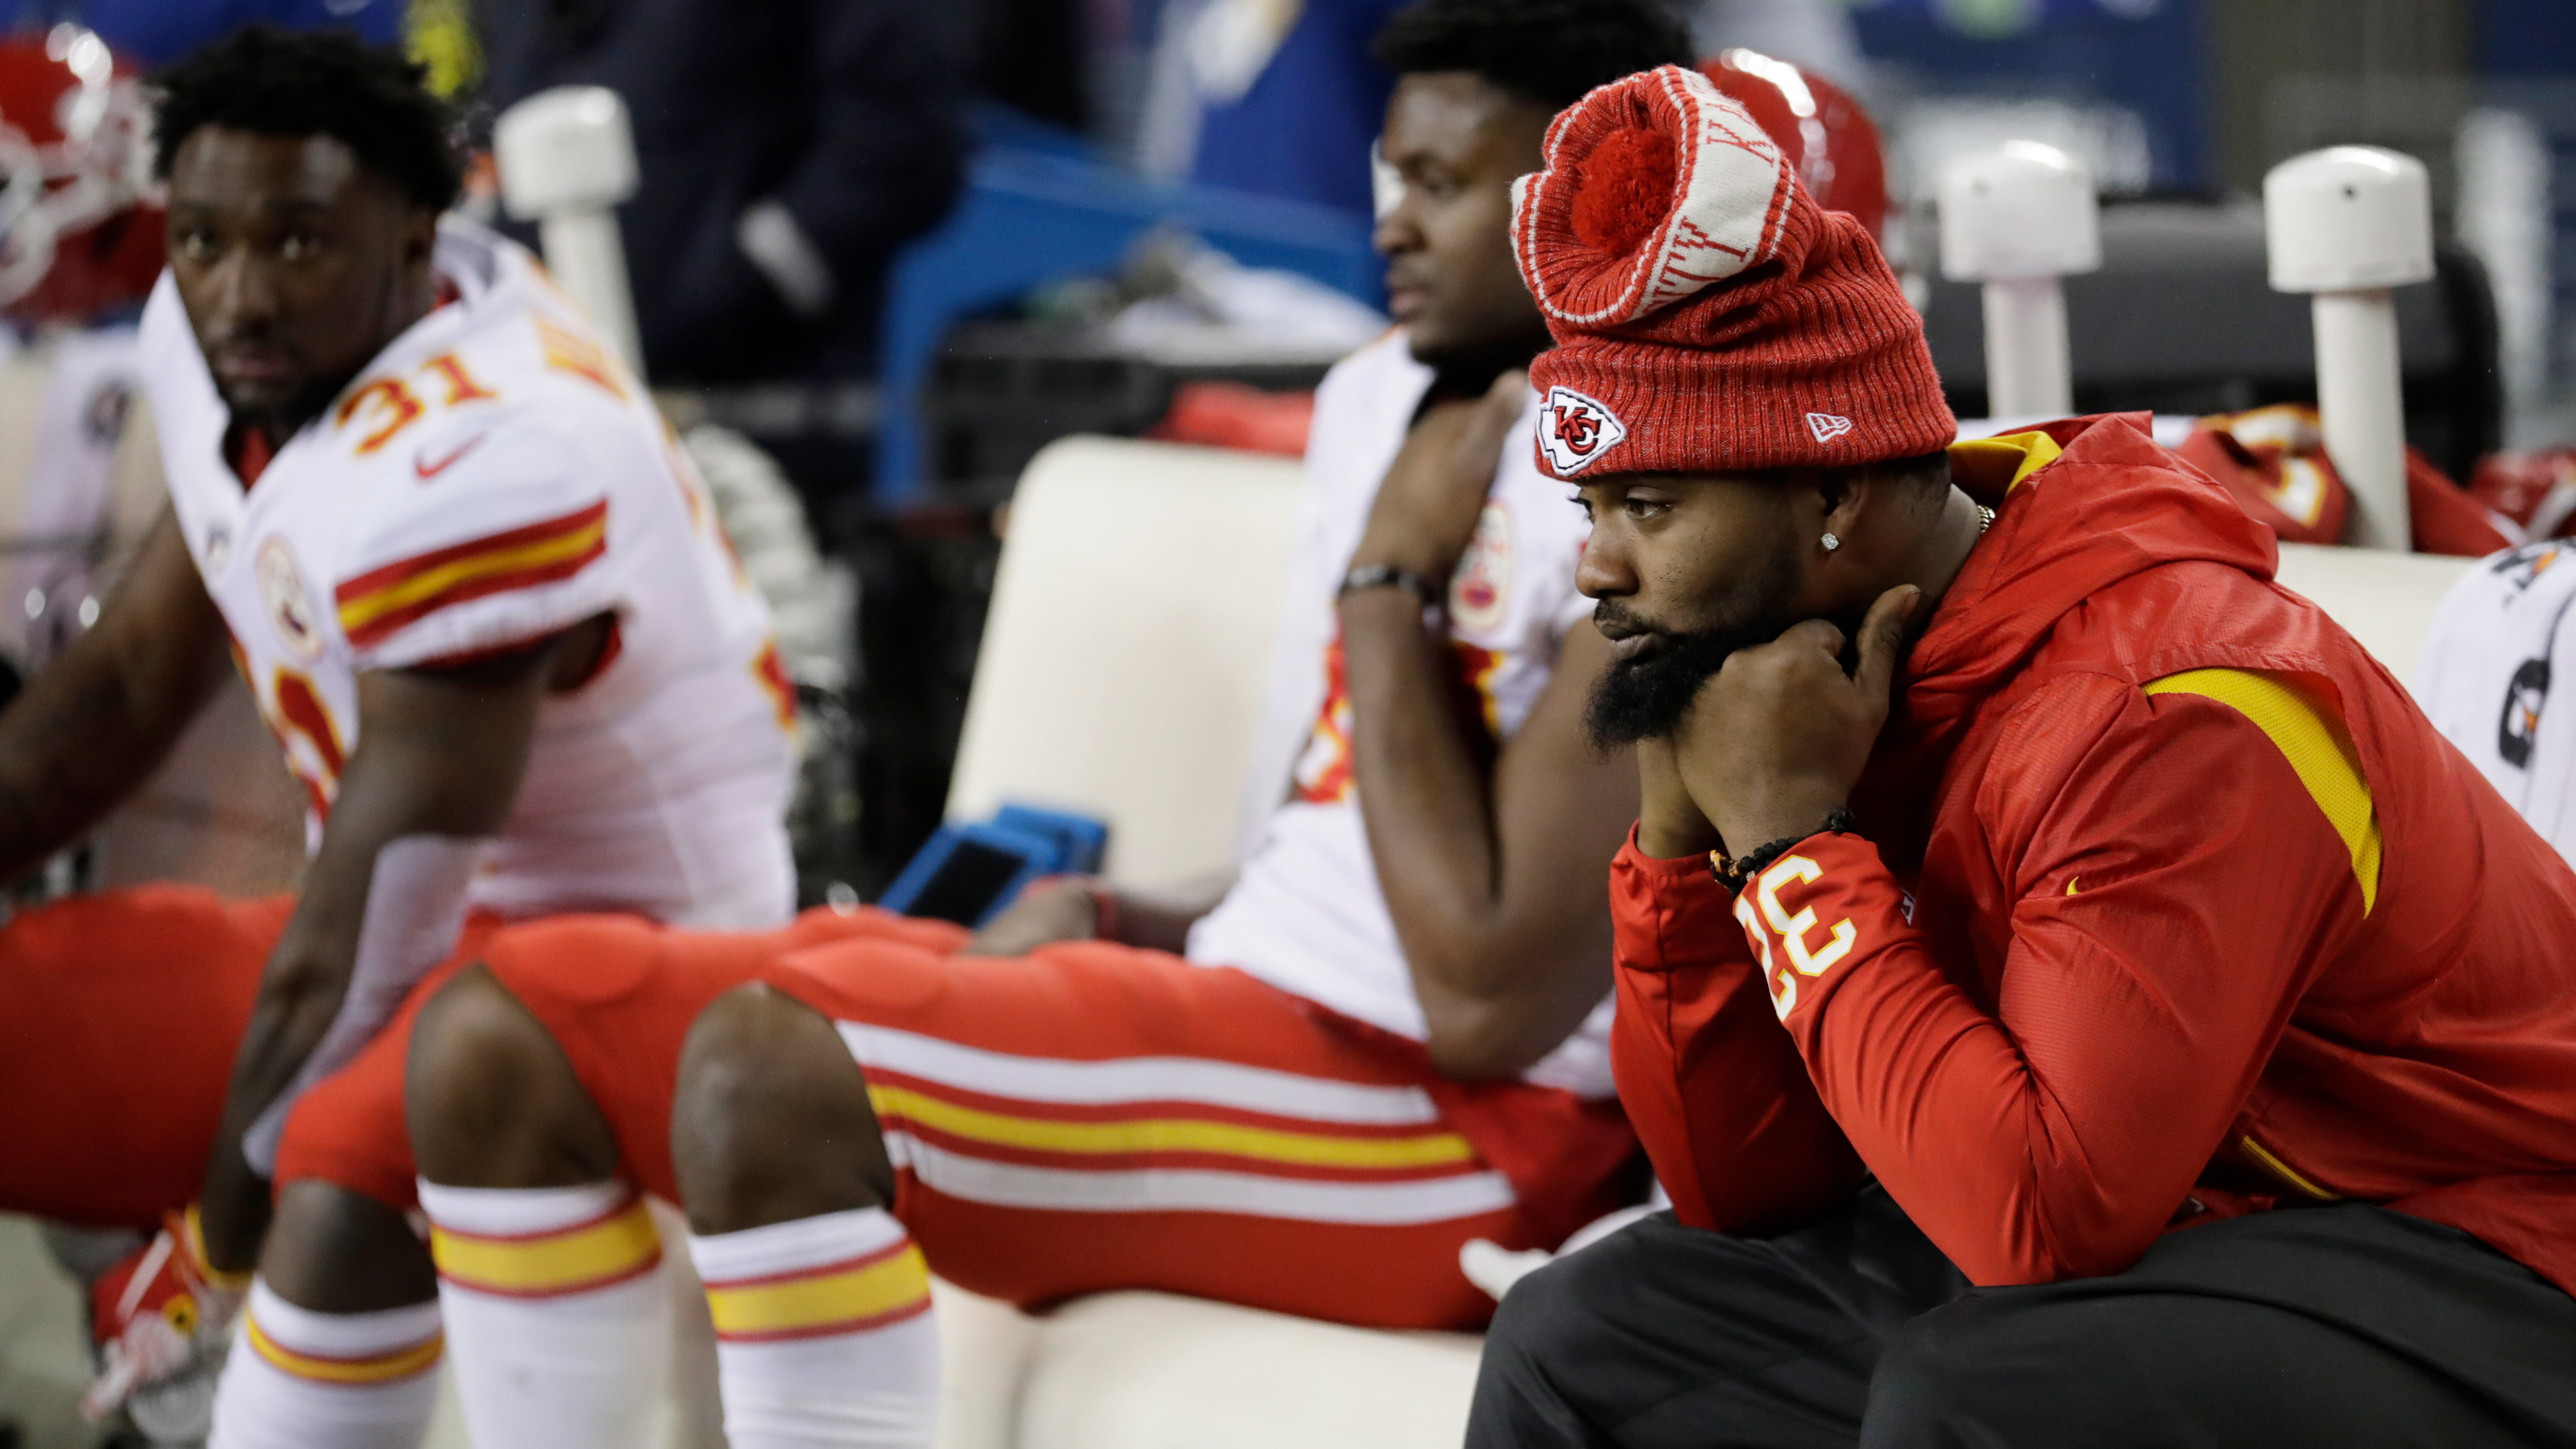 Chiefs must make third time the charm in attempt to clinch AFC's top seed